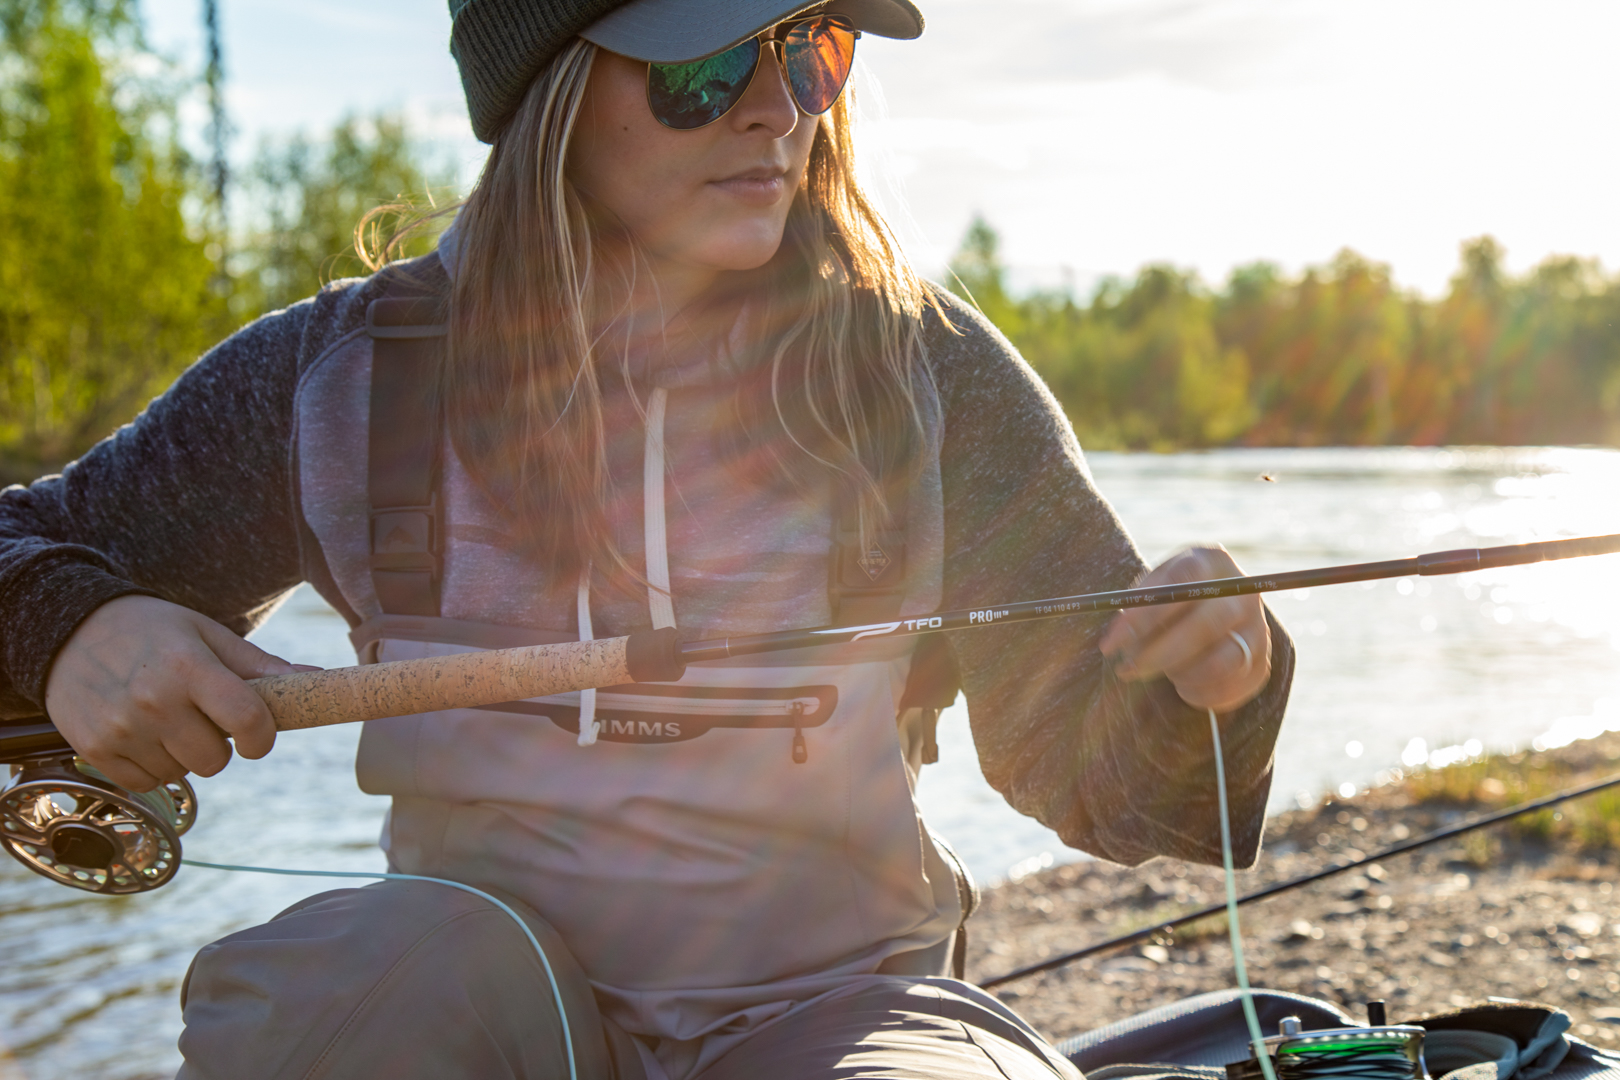 Ladies Fly Fishing - How the river connects us as women, as anglers, as  friends.